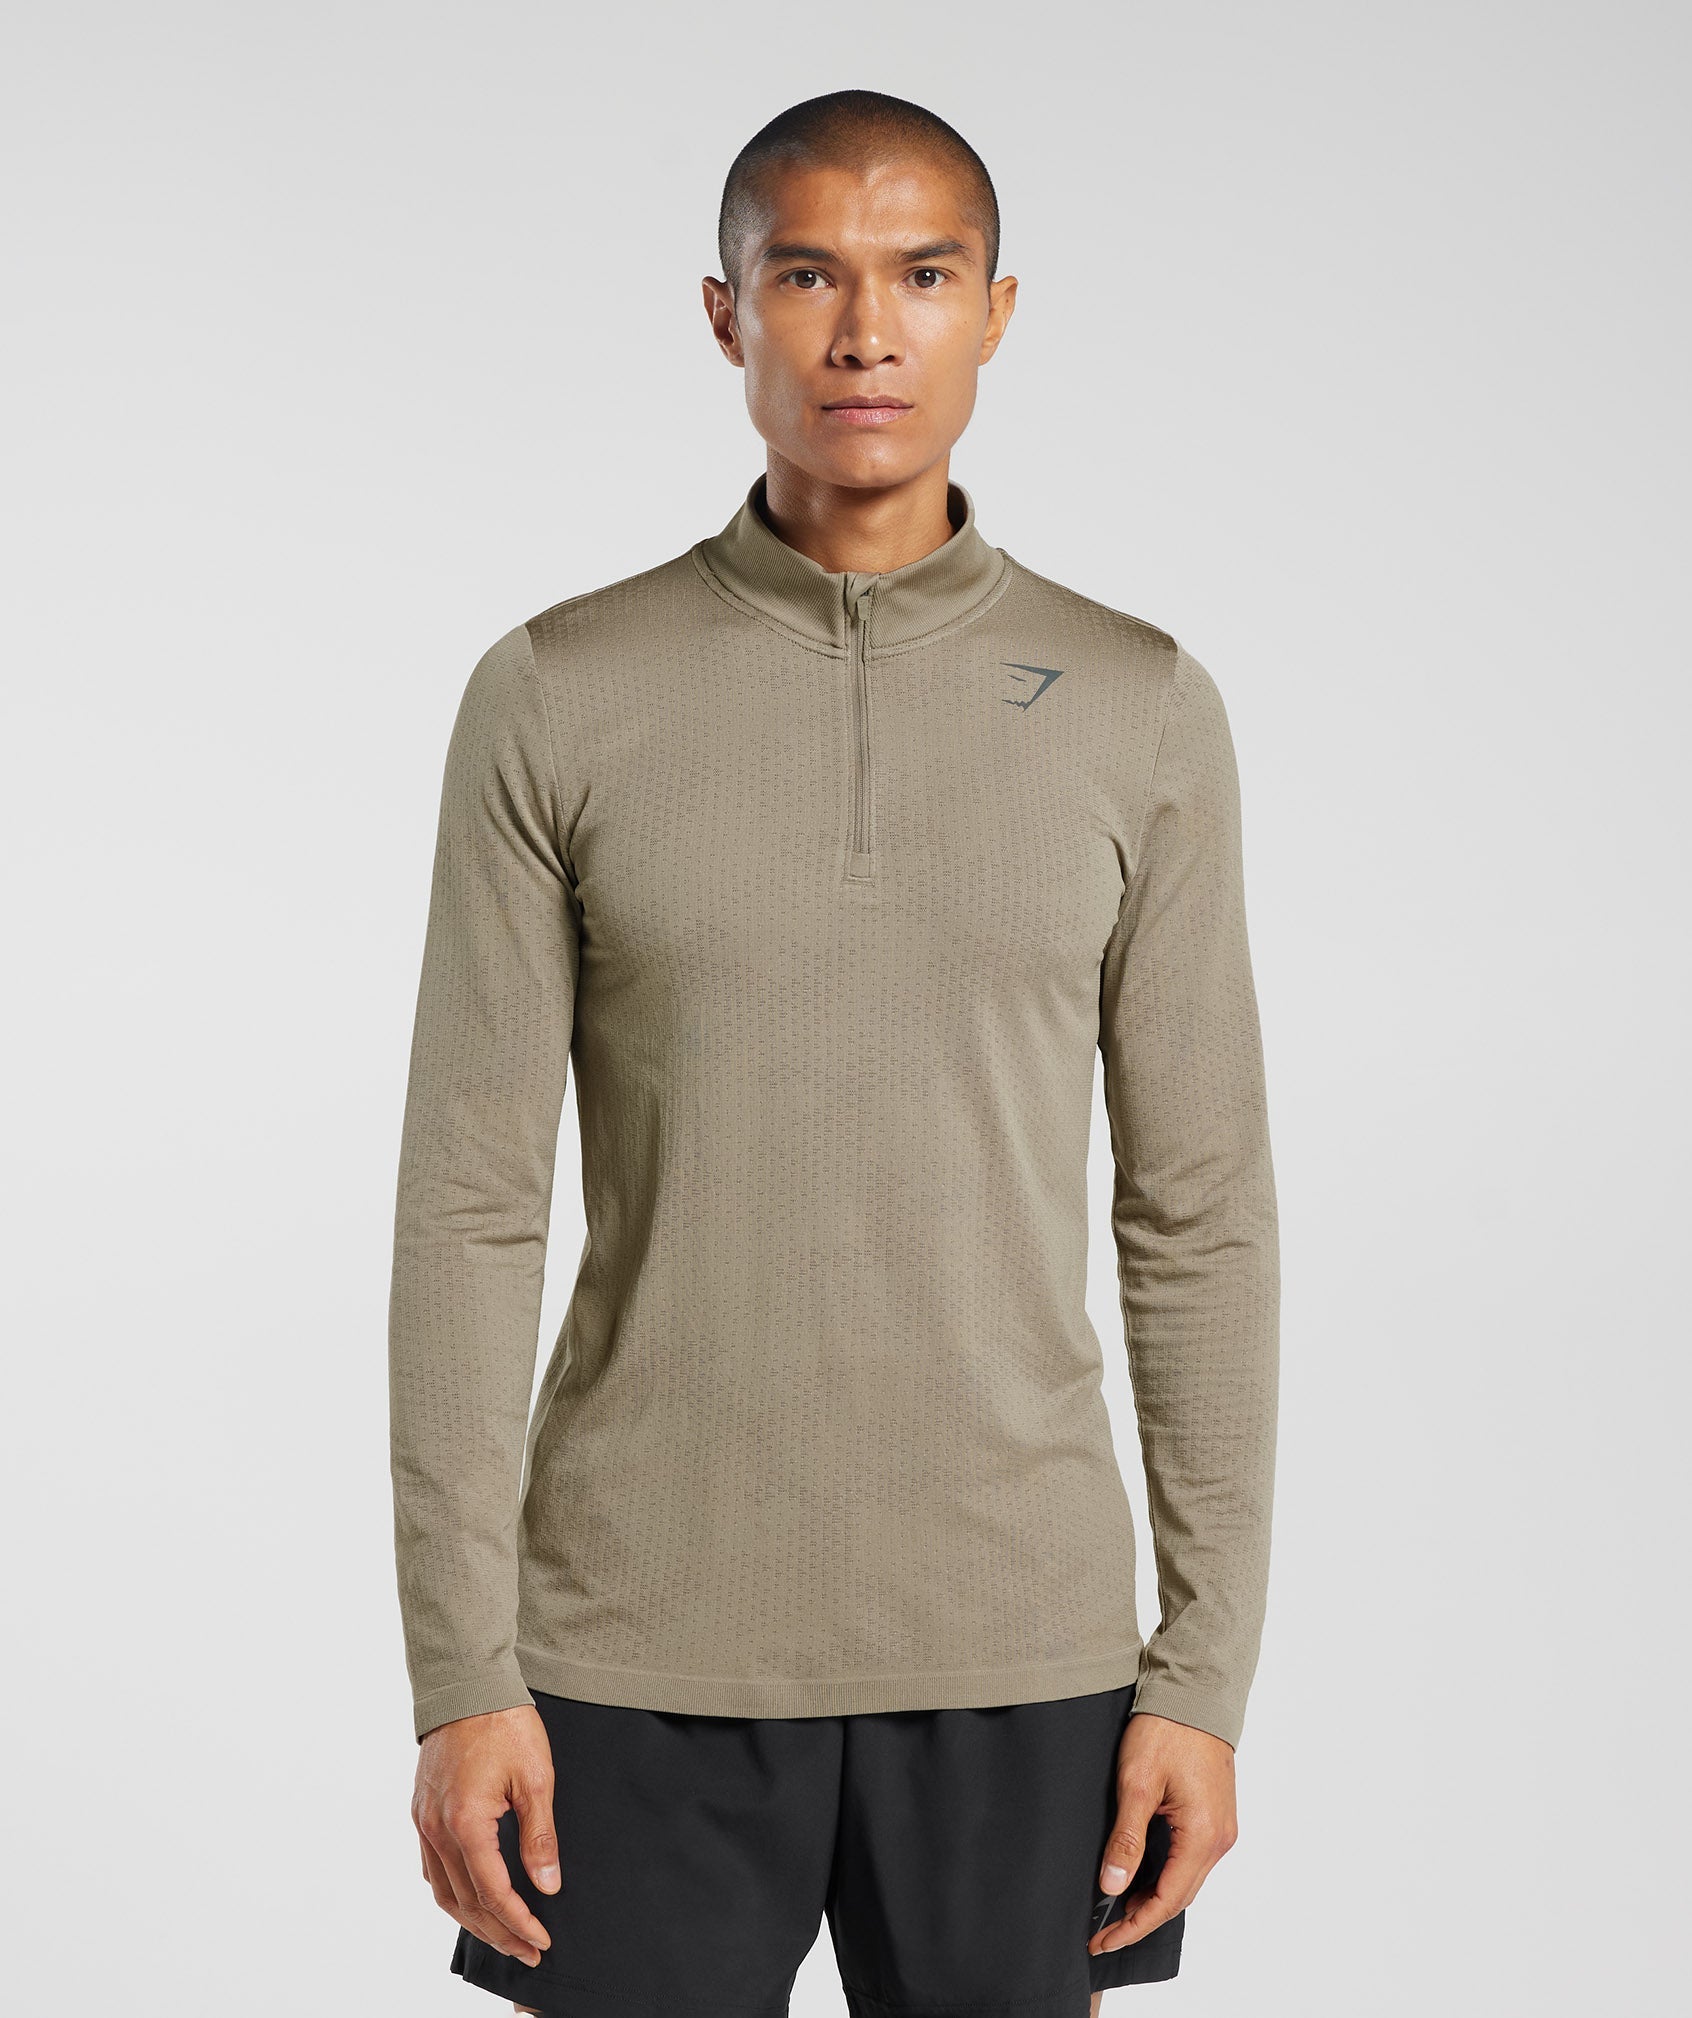 Sport Seamless 1/4 Zip in {{variantColor} is out of stock